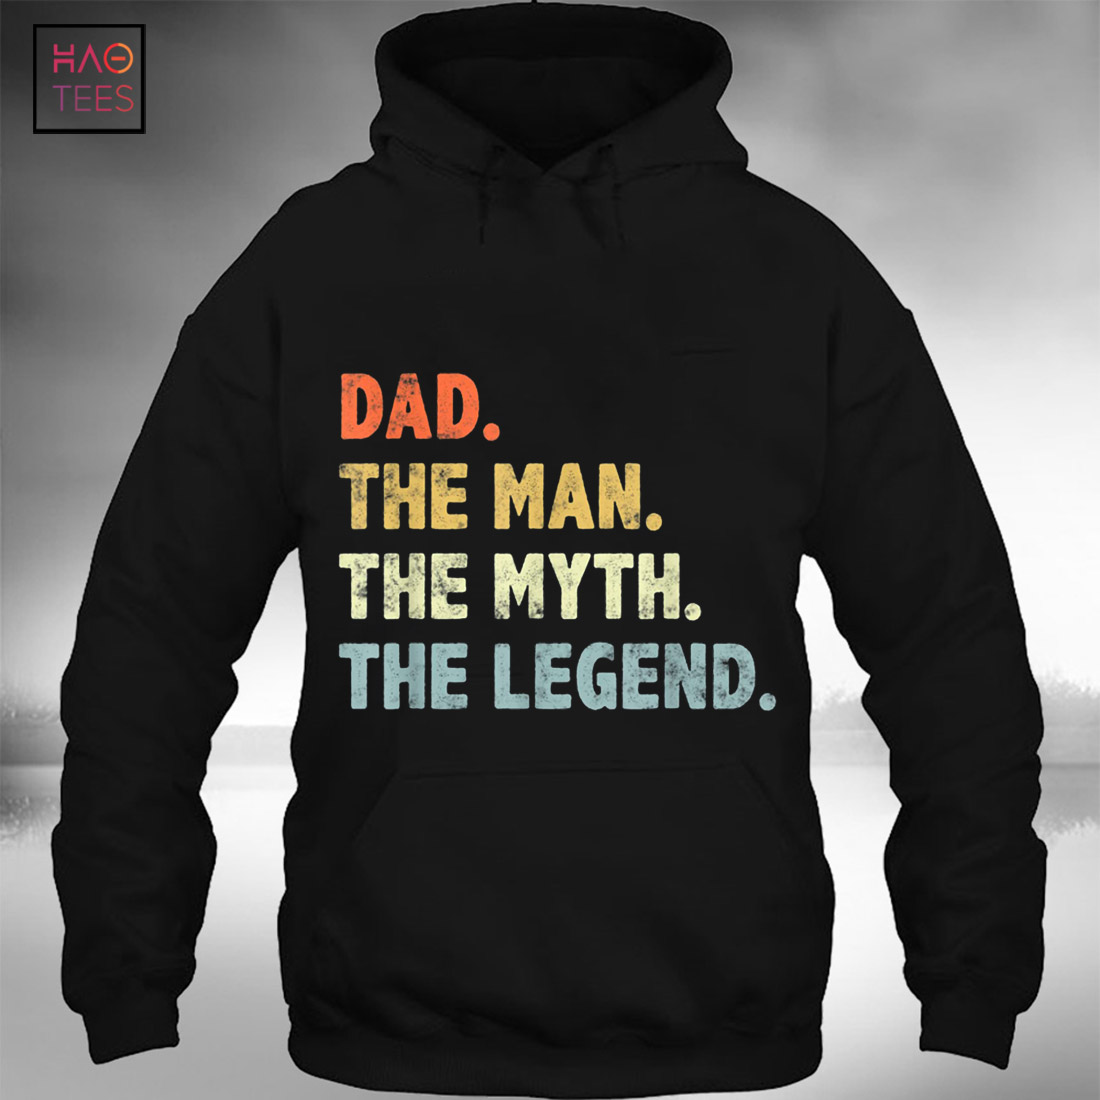 Gift For Father Gift For Dad Father's Day T-Shirt Grandpa The Man The Myth T-Shirt Gift For Husband. Happy Father's Day